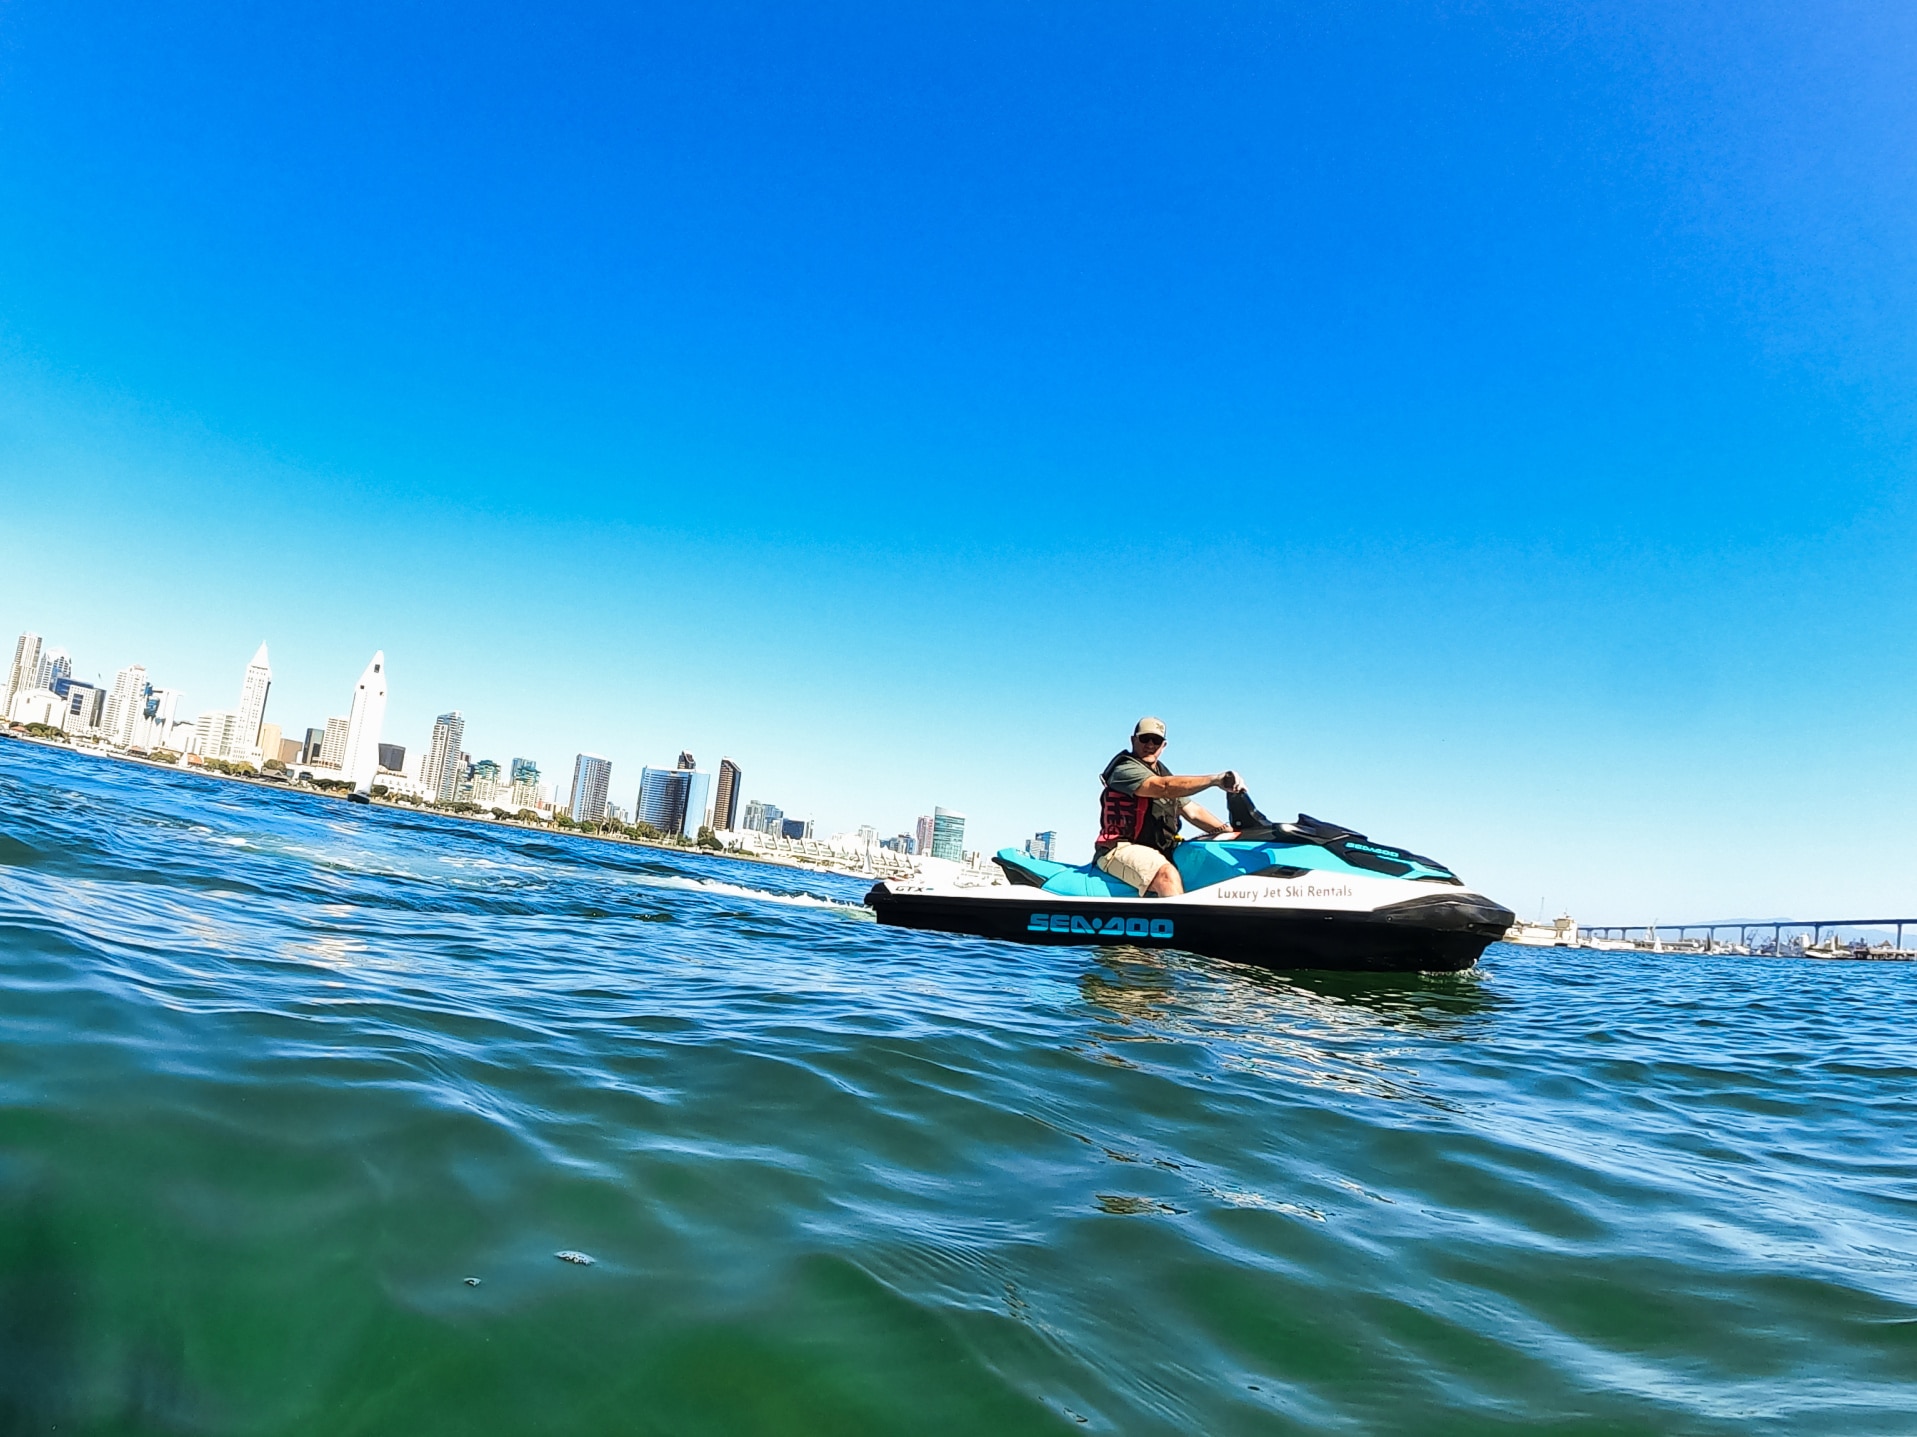 Treat yourself to a Sea-Doo tour in San Diego, CA